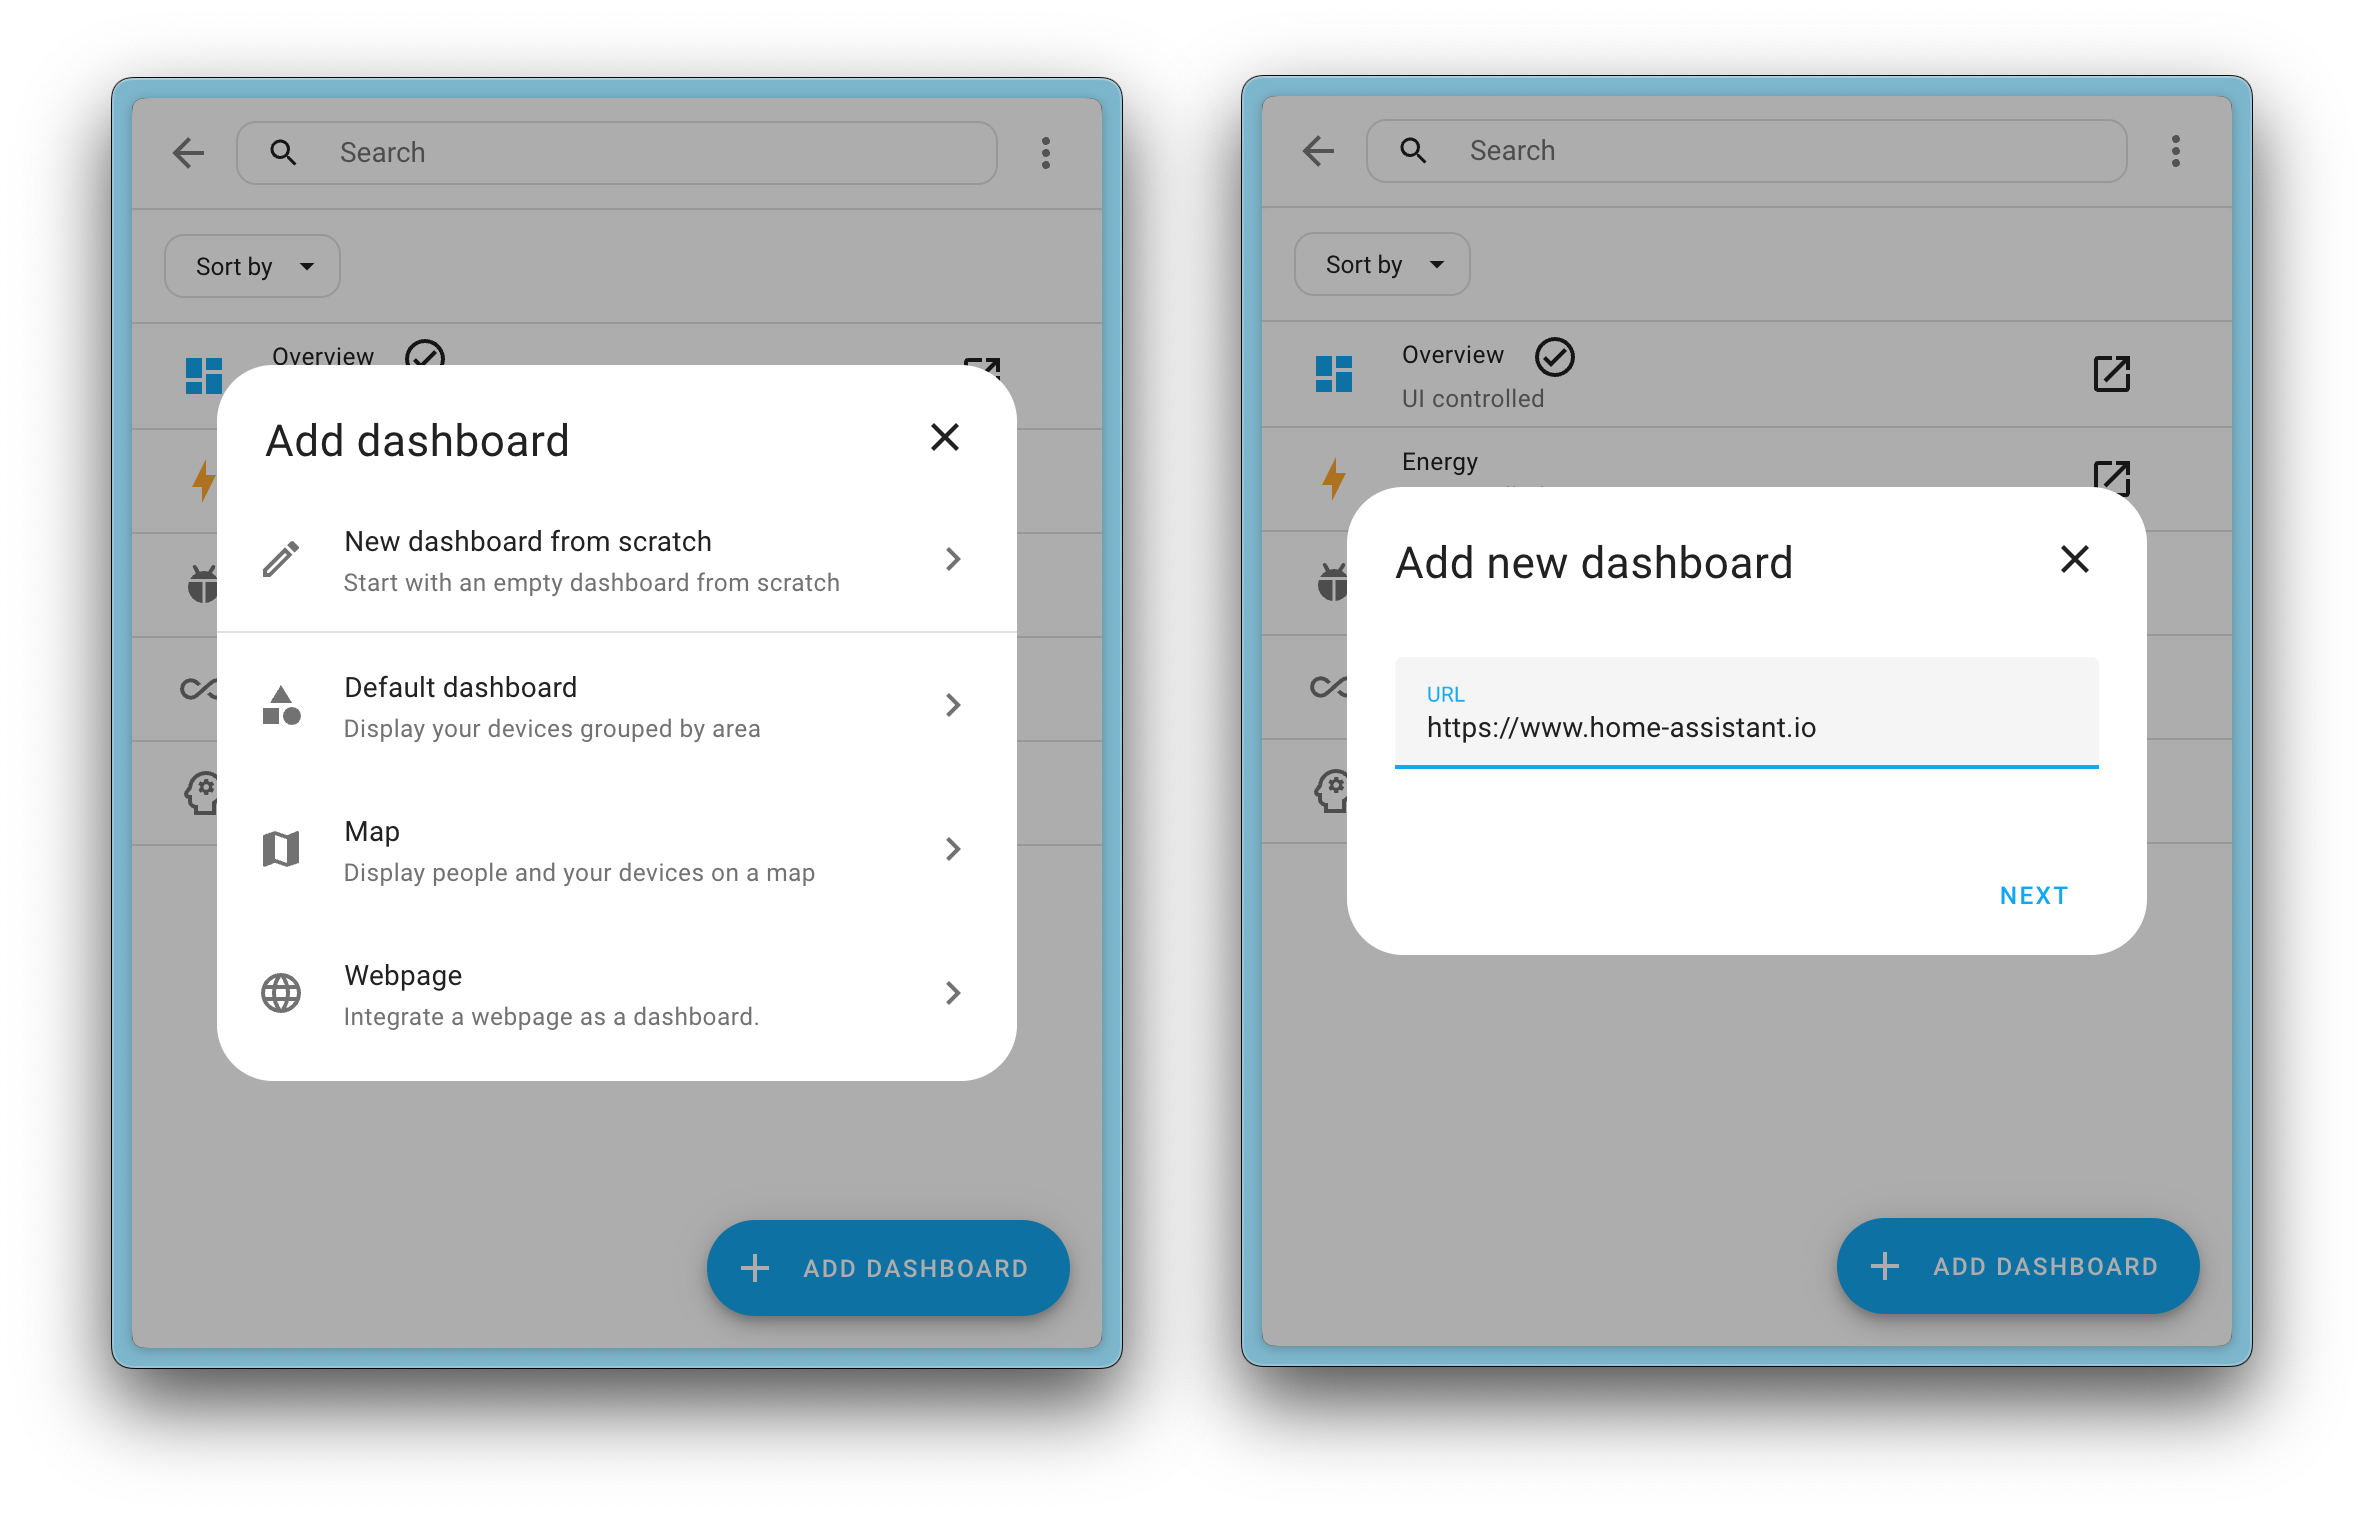 Screenshots showing addition of a new webpage dashboard to Home Assistant, embedding the Home Assistant website.